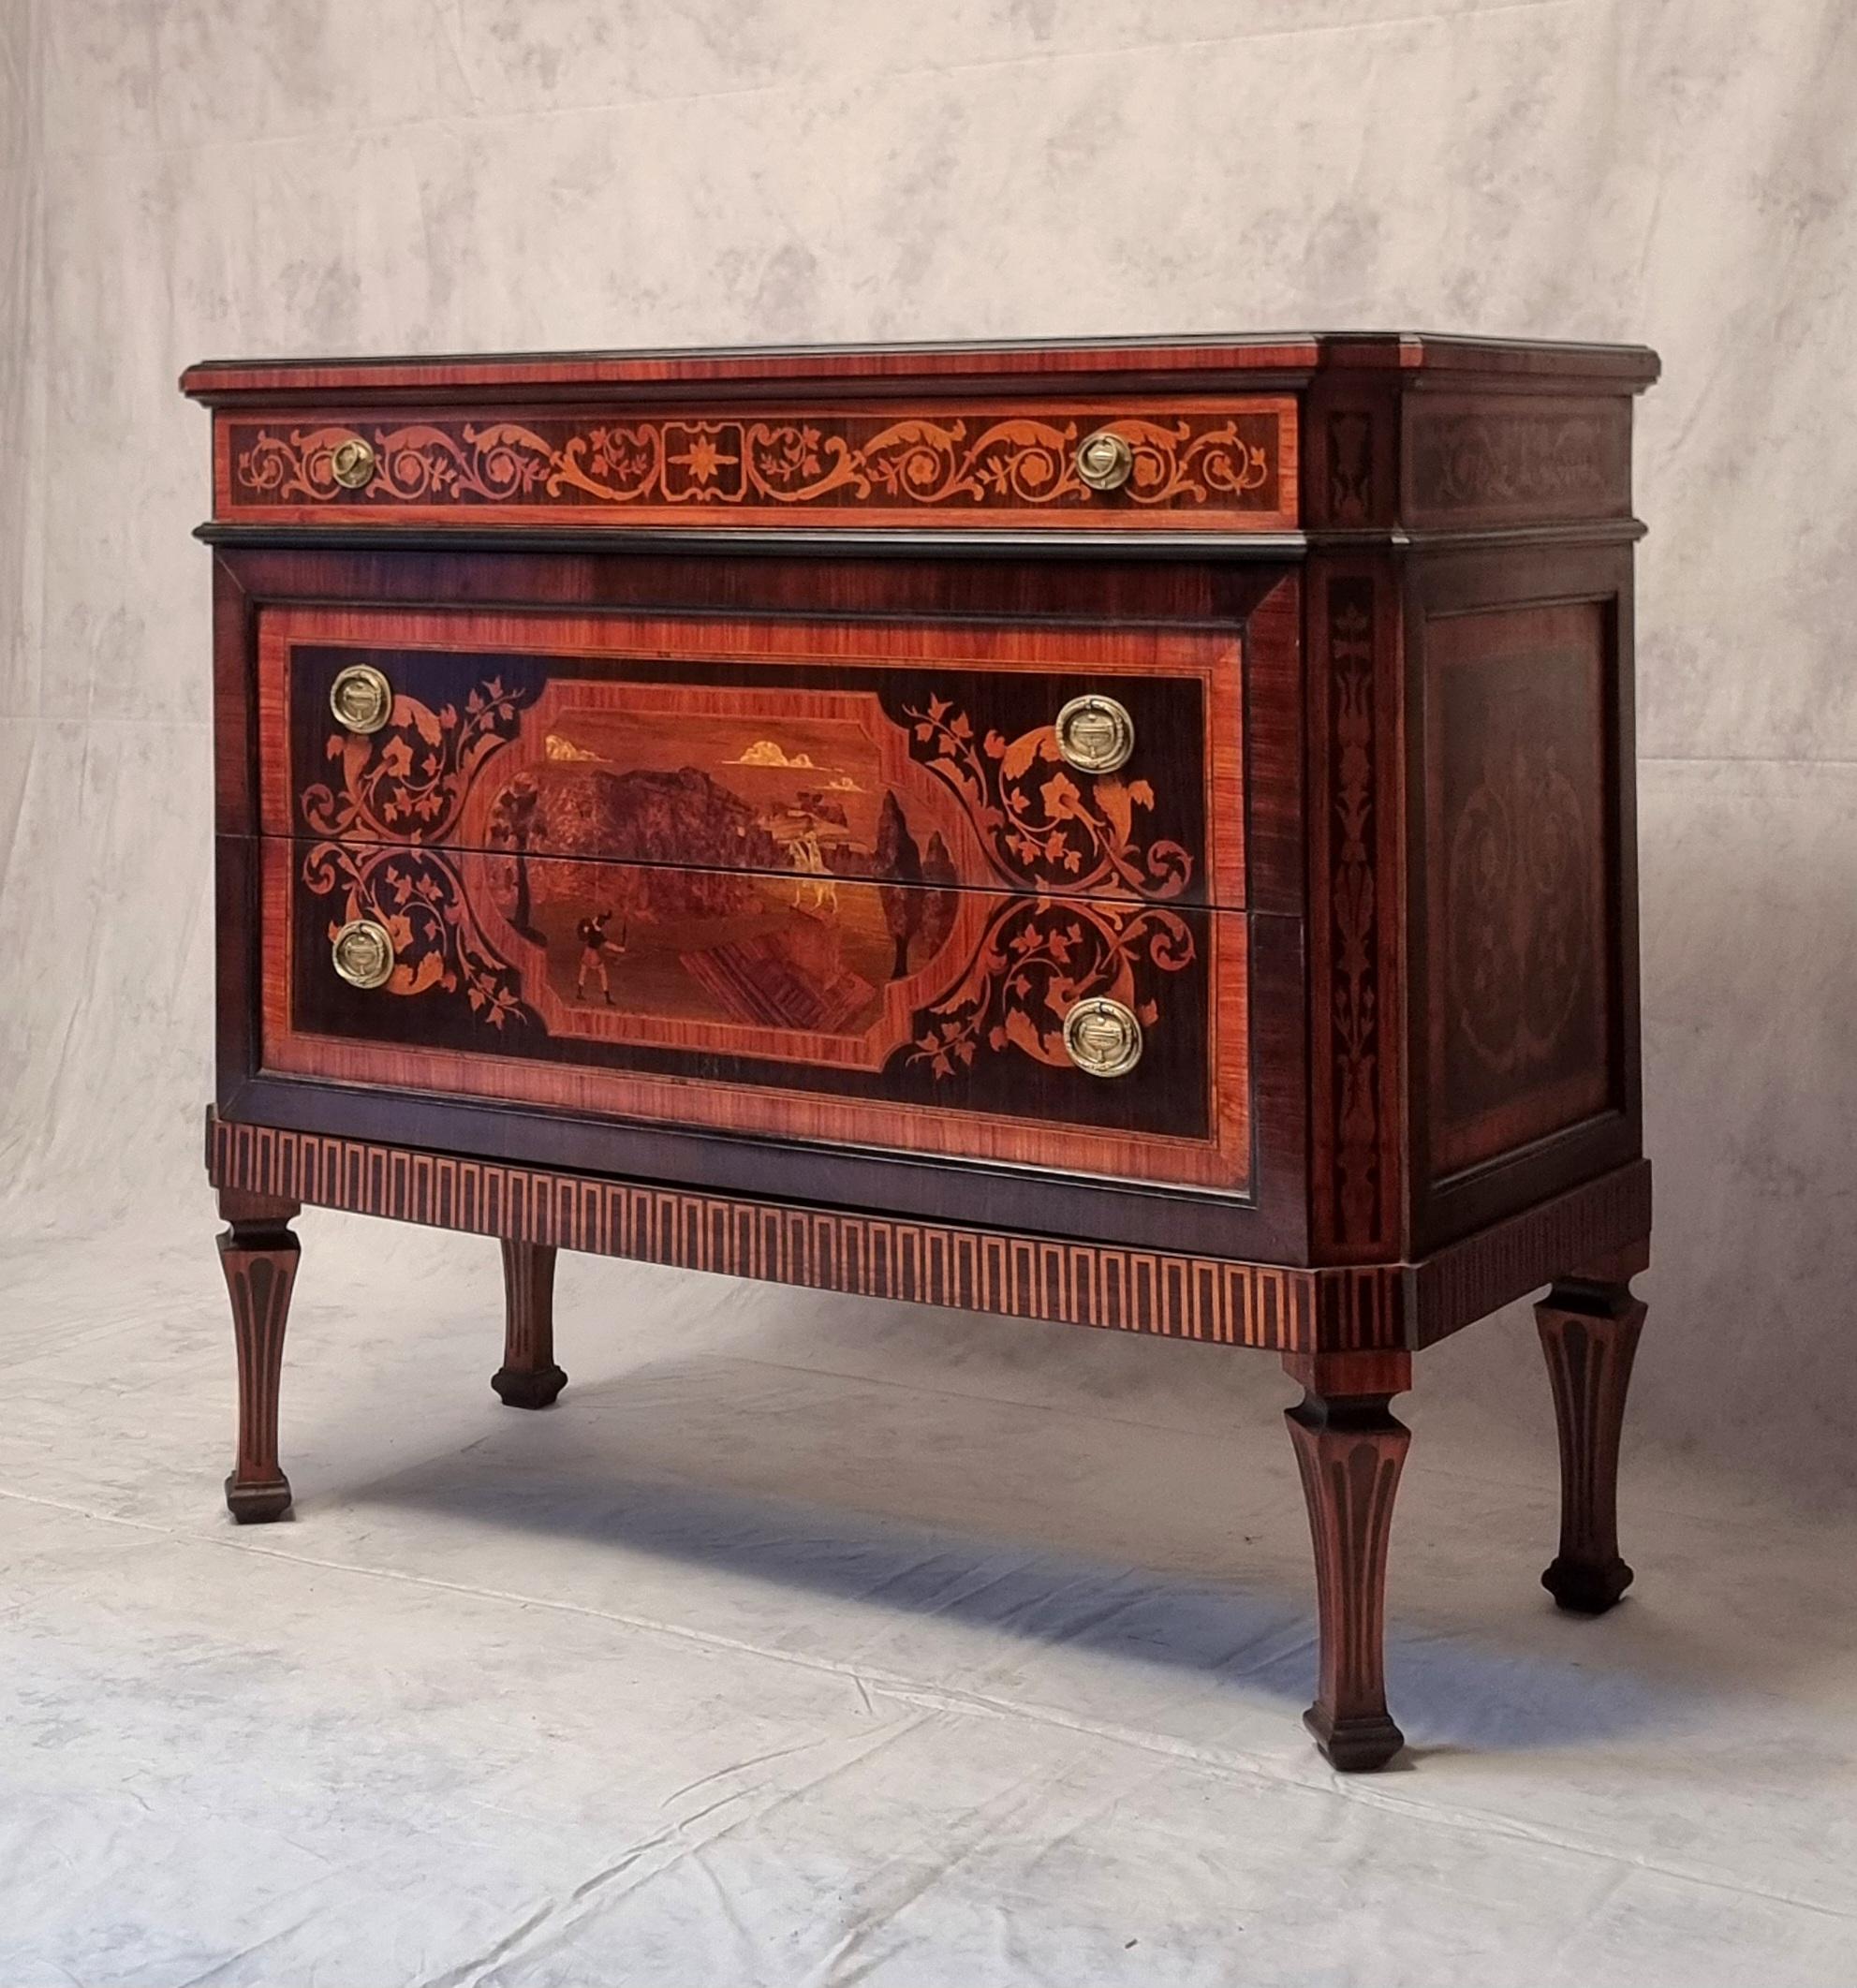 Magnificent Italian chest of drawers in marquetry from the beginning of the 20th century. Chest of drawers in Louis XVI style very rich in marquetry opening with three drawers on the front. The amounts of the frontage are cut sides. Particularly